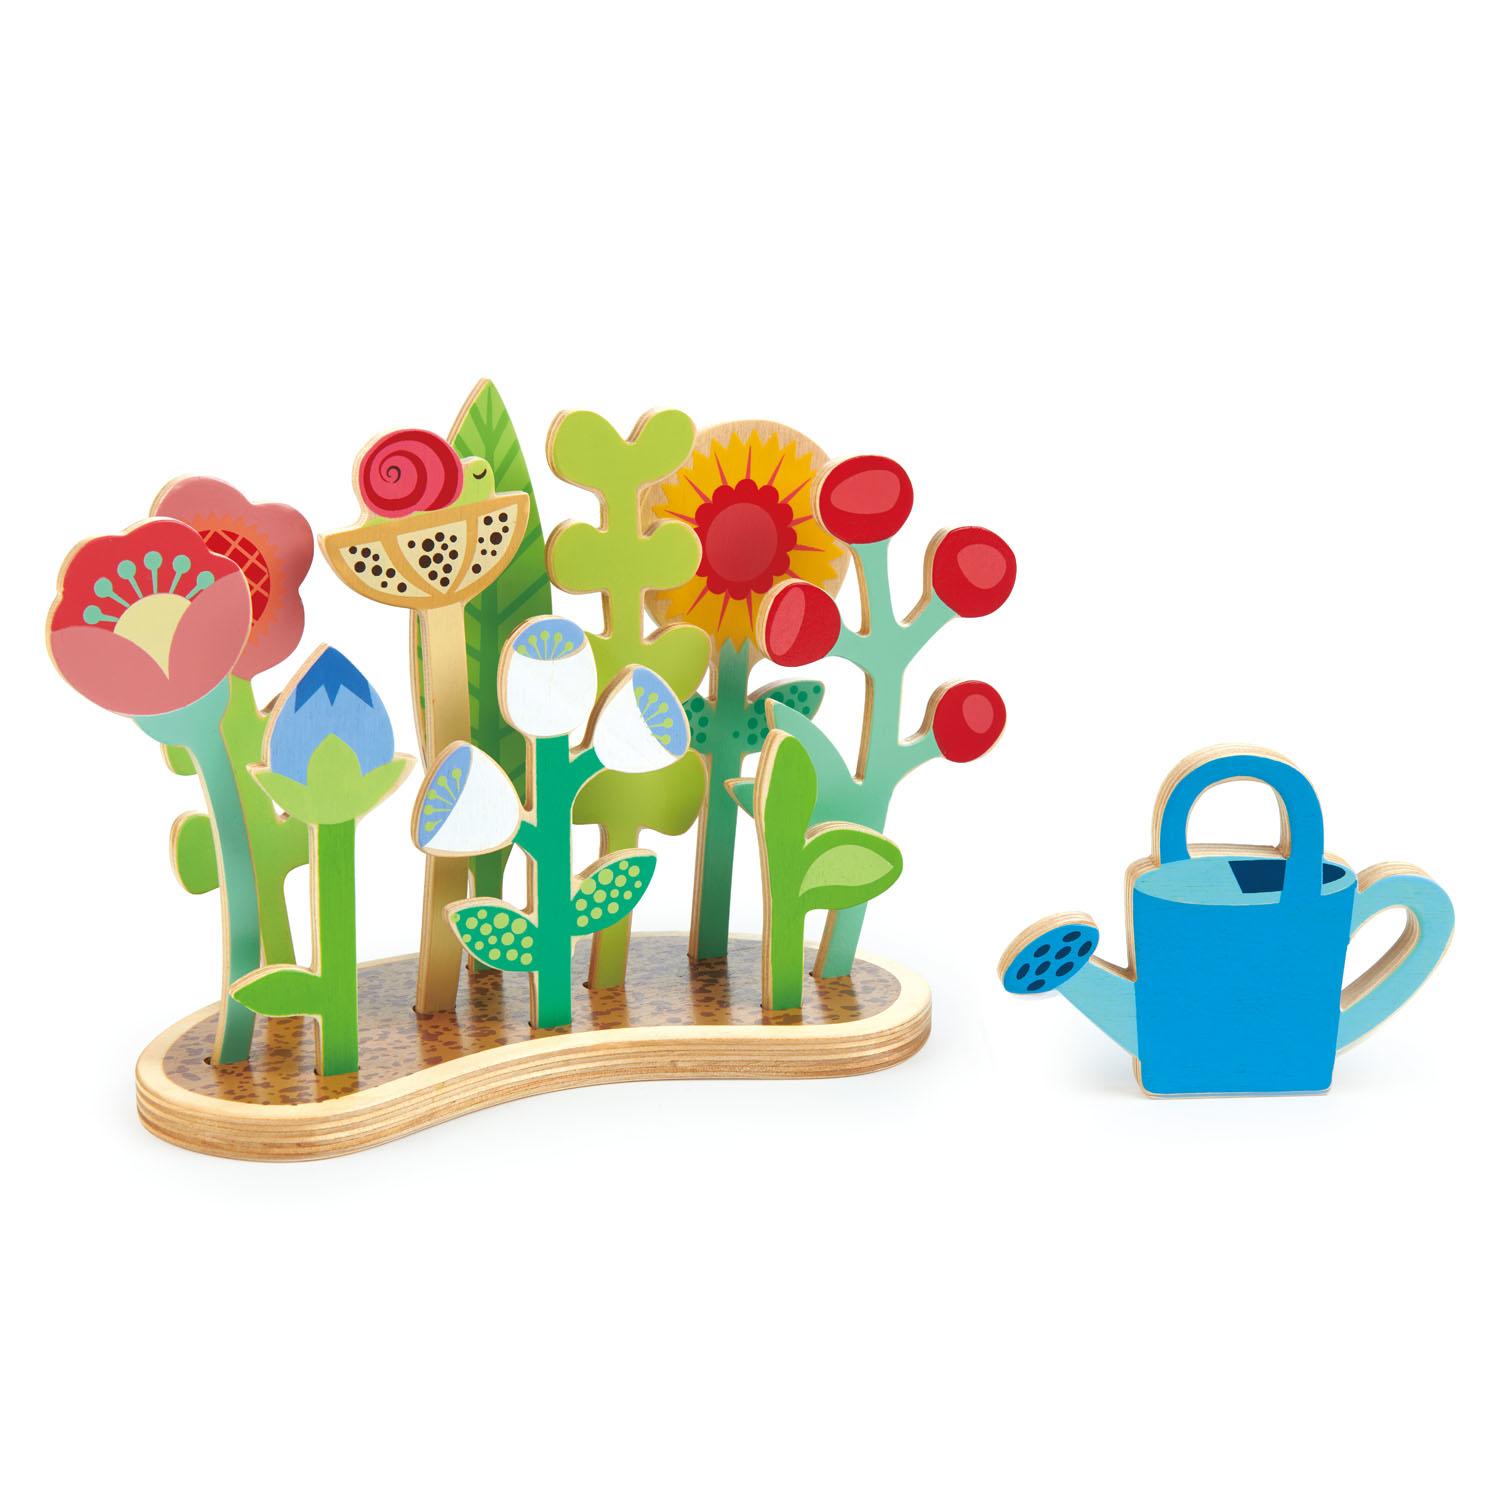 New Wooden Toy Flower Bed with Changeable Plants and Watering Can #4